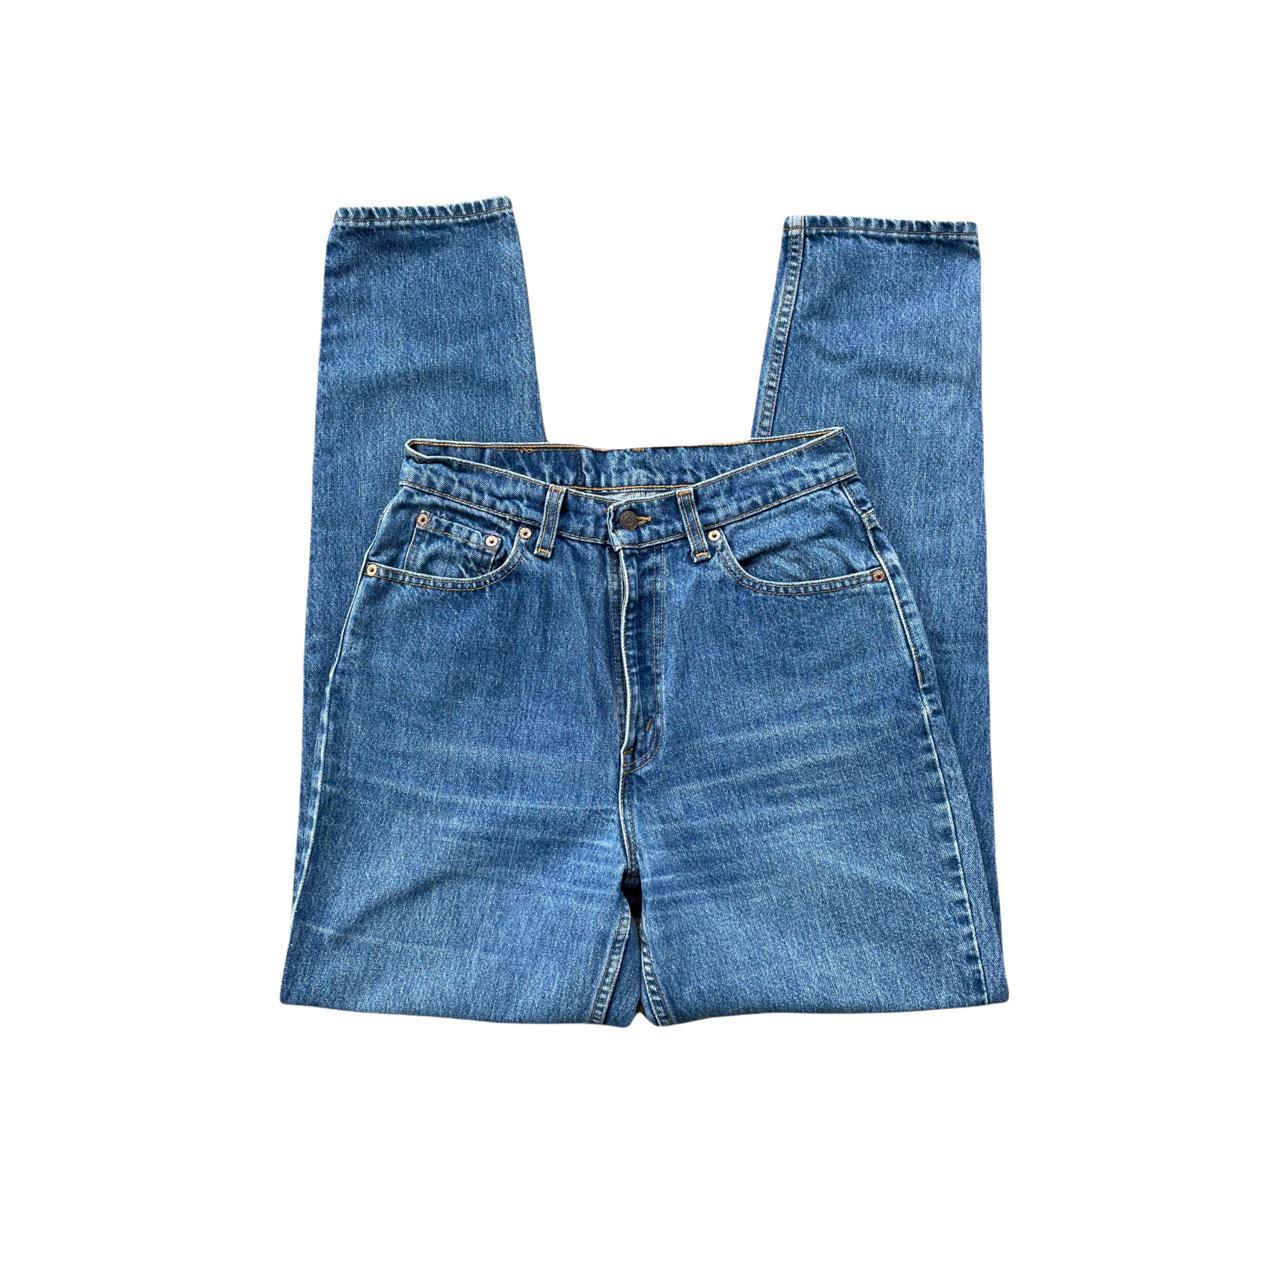 Product Image 2 - Vintage 90s Levi’s 521 High